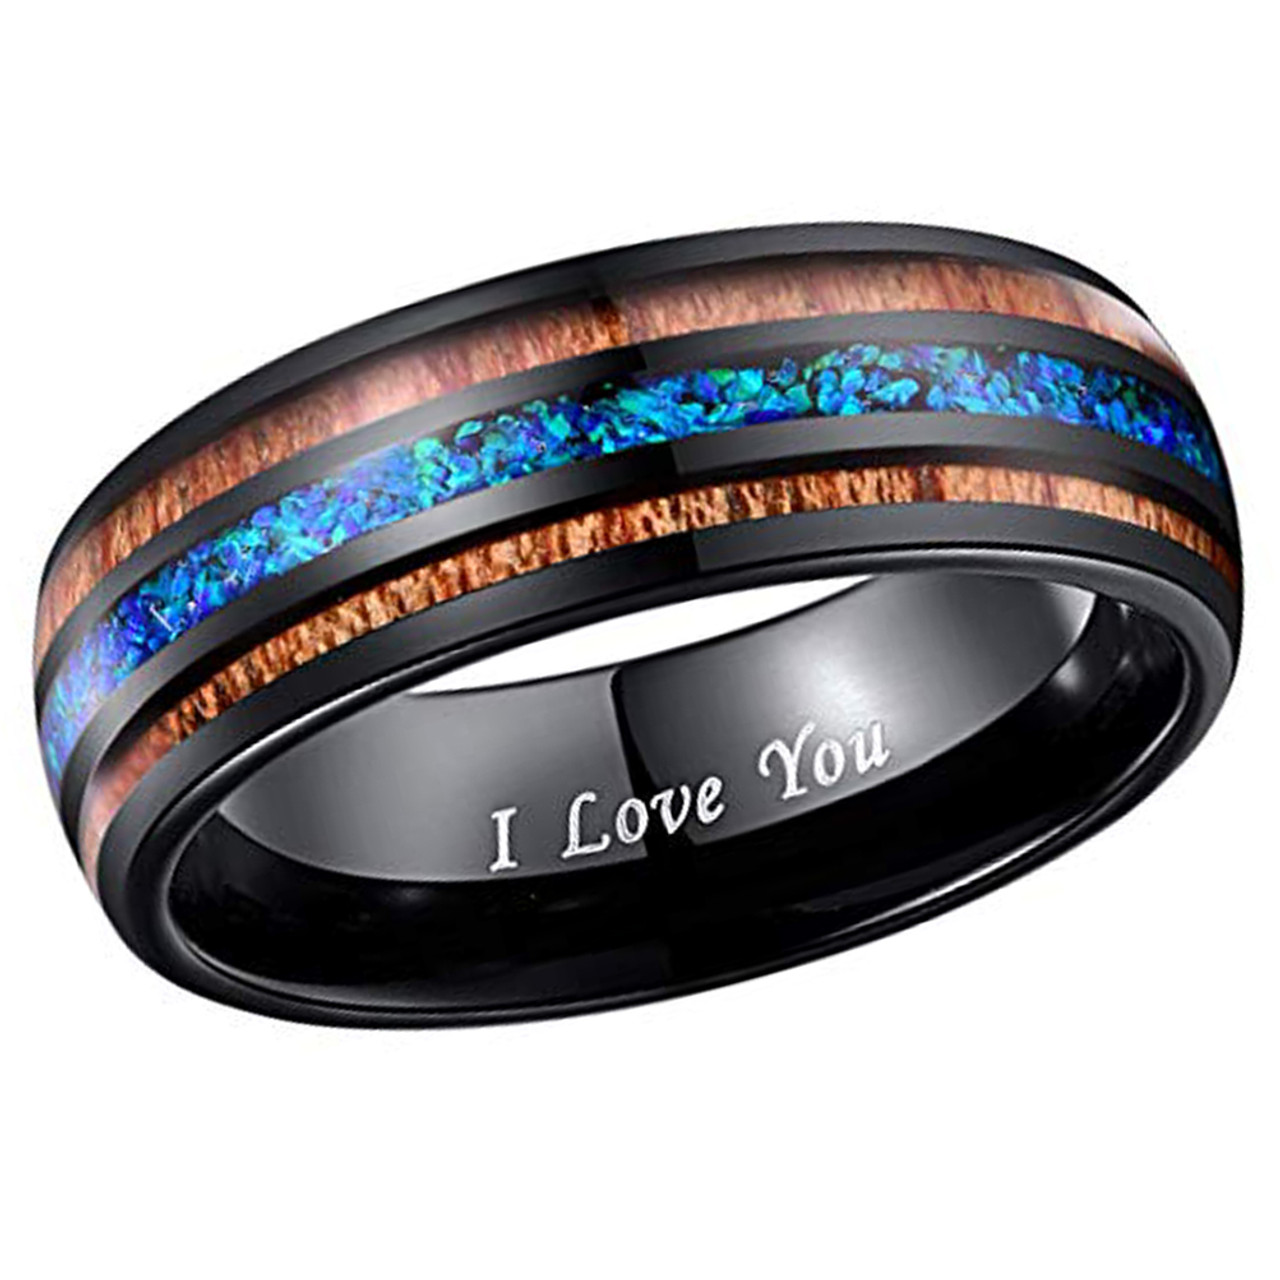 (8mm) Unisex or Men's Tungsten Carbide Wedding Ring Band - Black Tone Wood and Sea Blue Opal Inlay Ring.  I Love You Text.